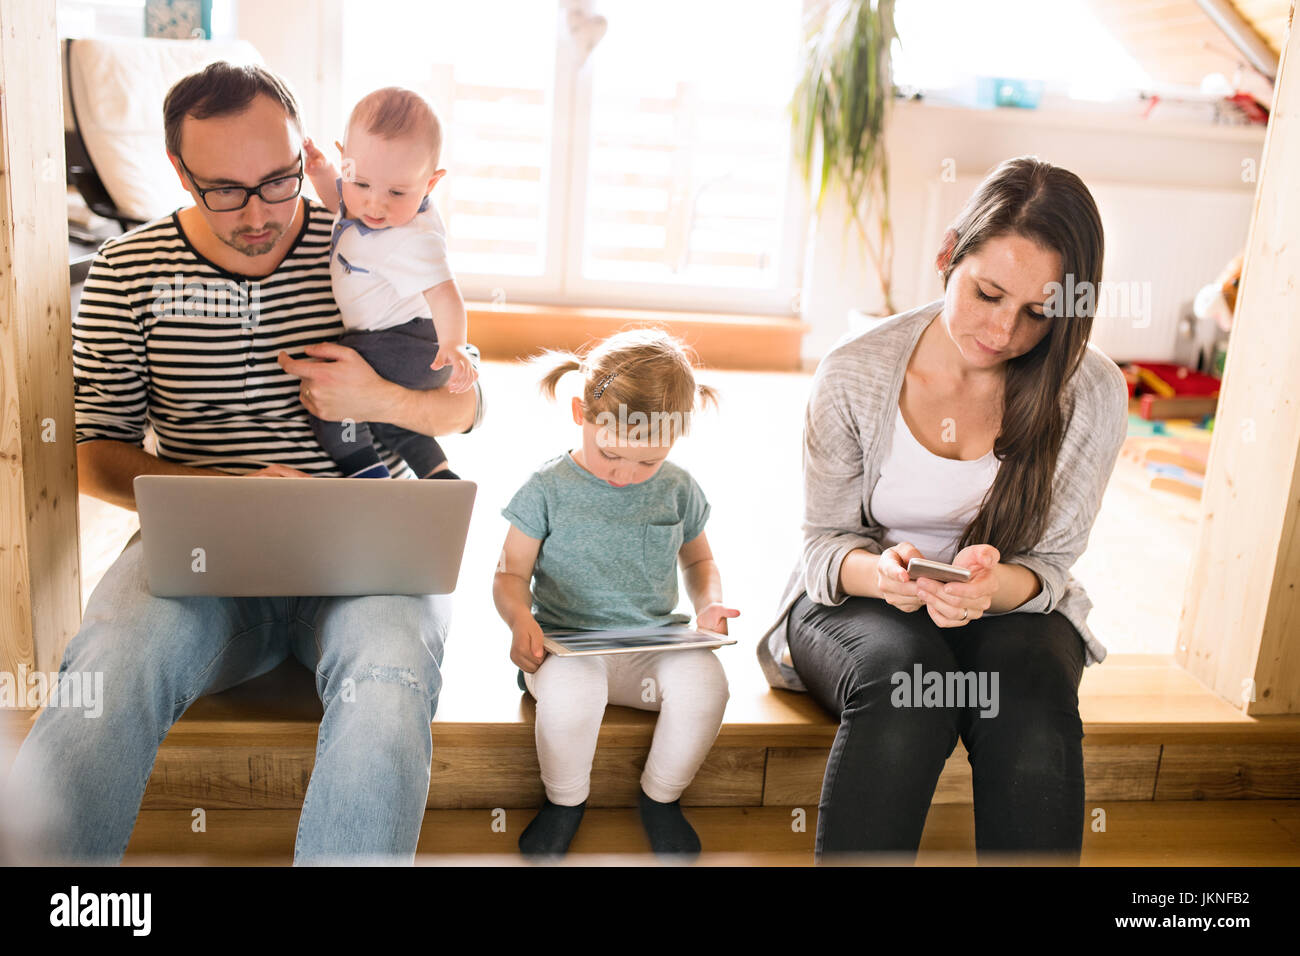 https://c8.alamy.com/comp/JKNFB2/young-parents-with-little-children-and-gadgets-at-home-JKNFB2.jpg